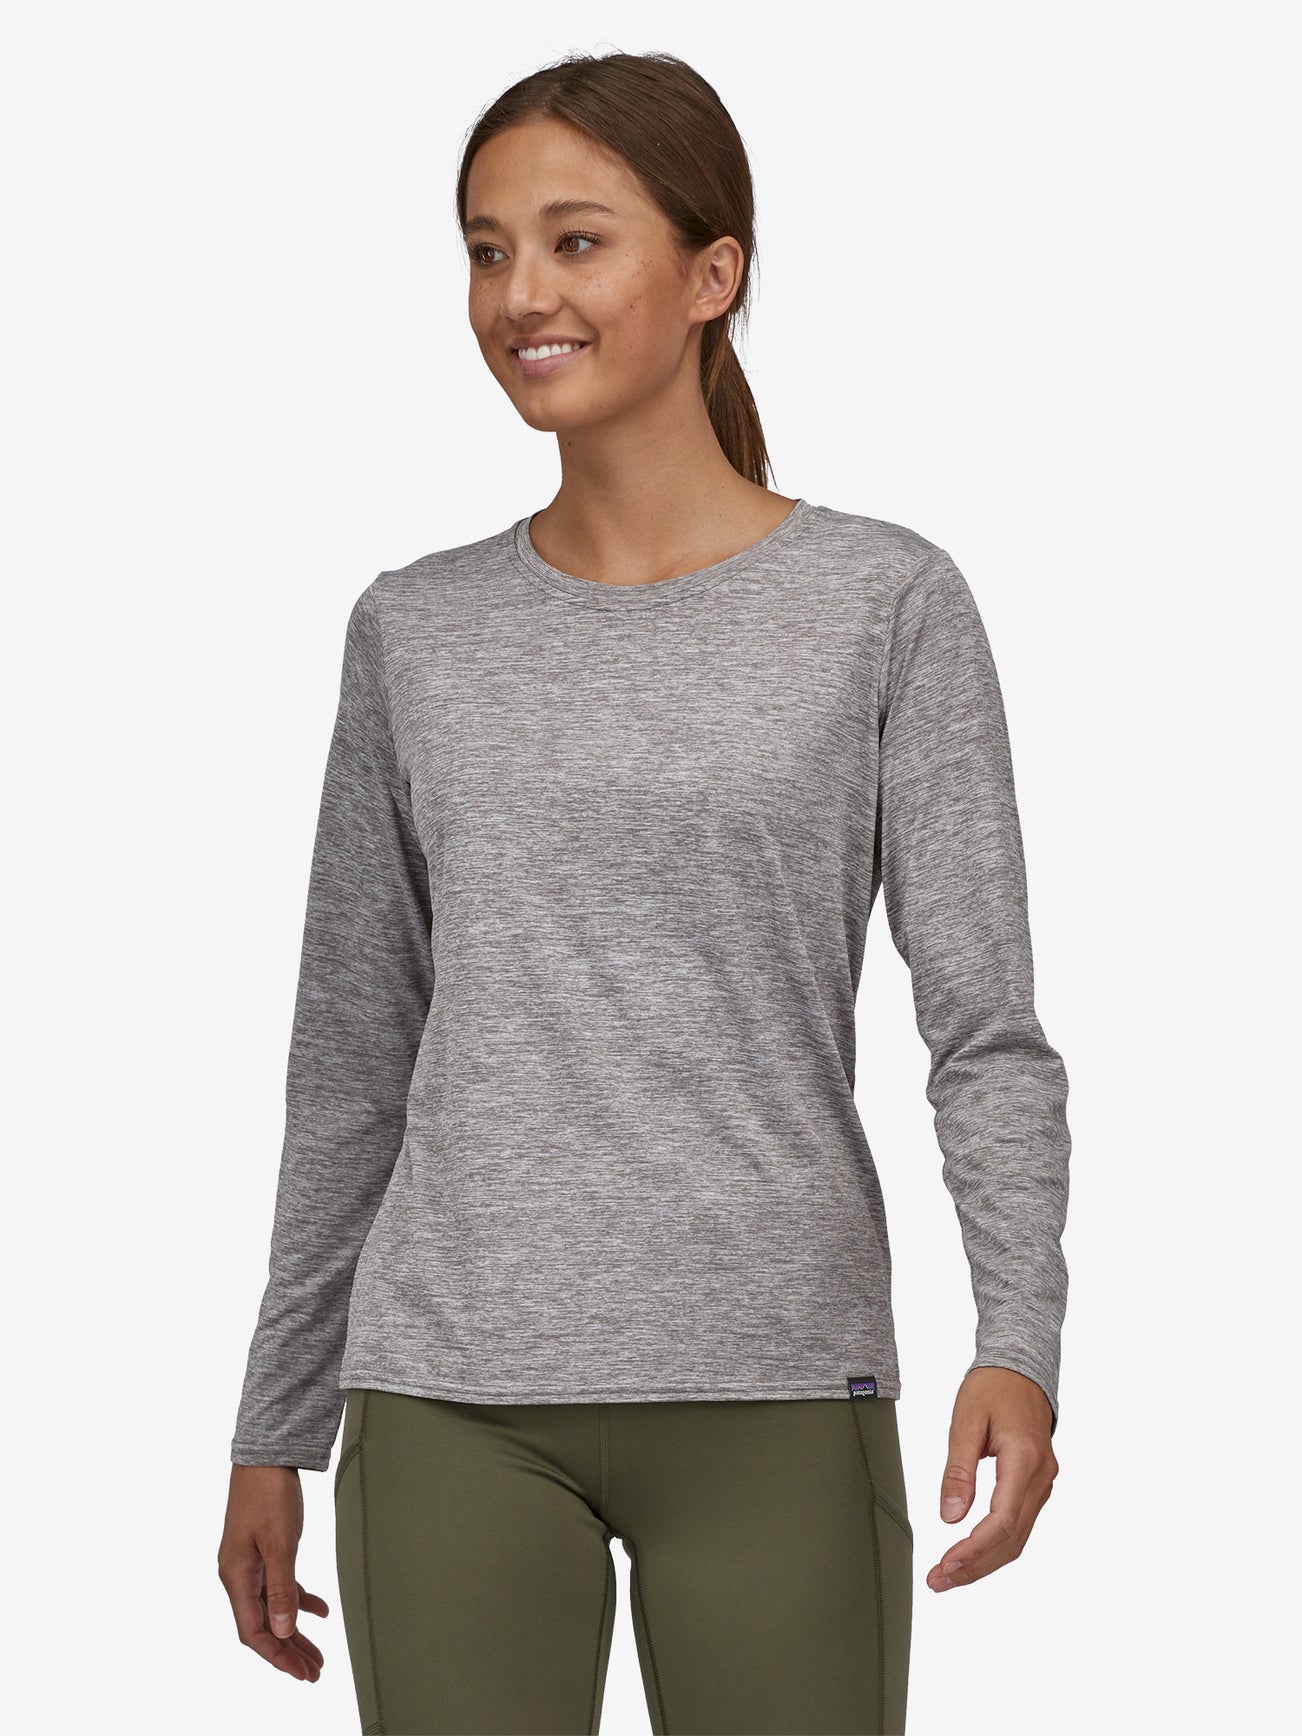 Patagonia Women's Cap Cool Daily Shirt - Feather Grey